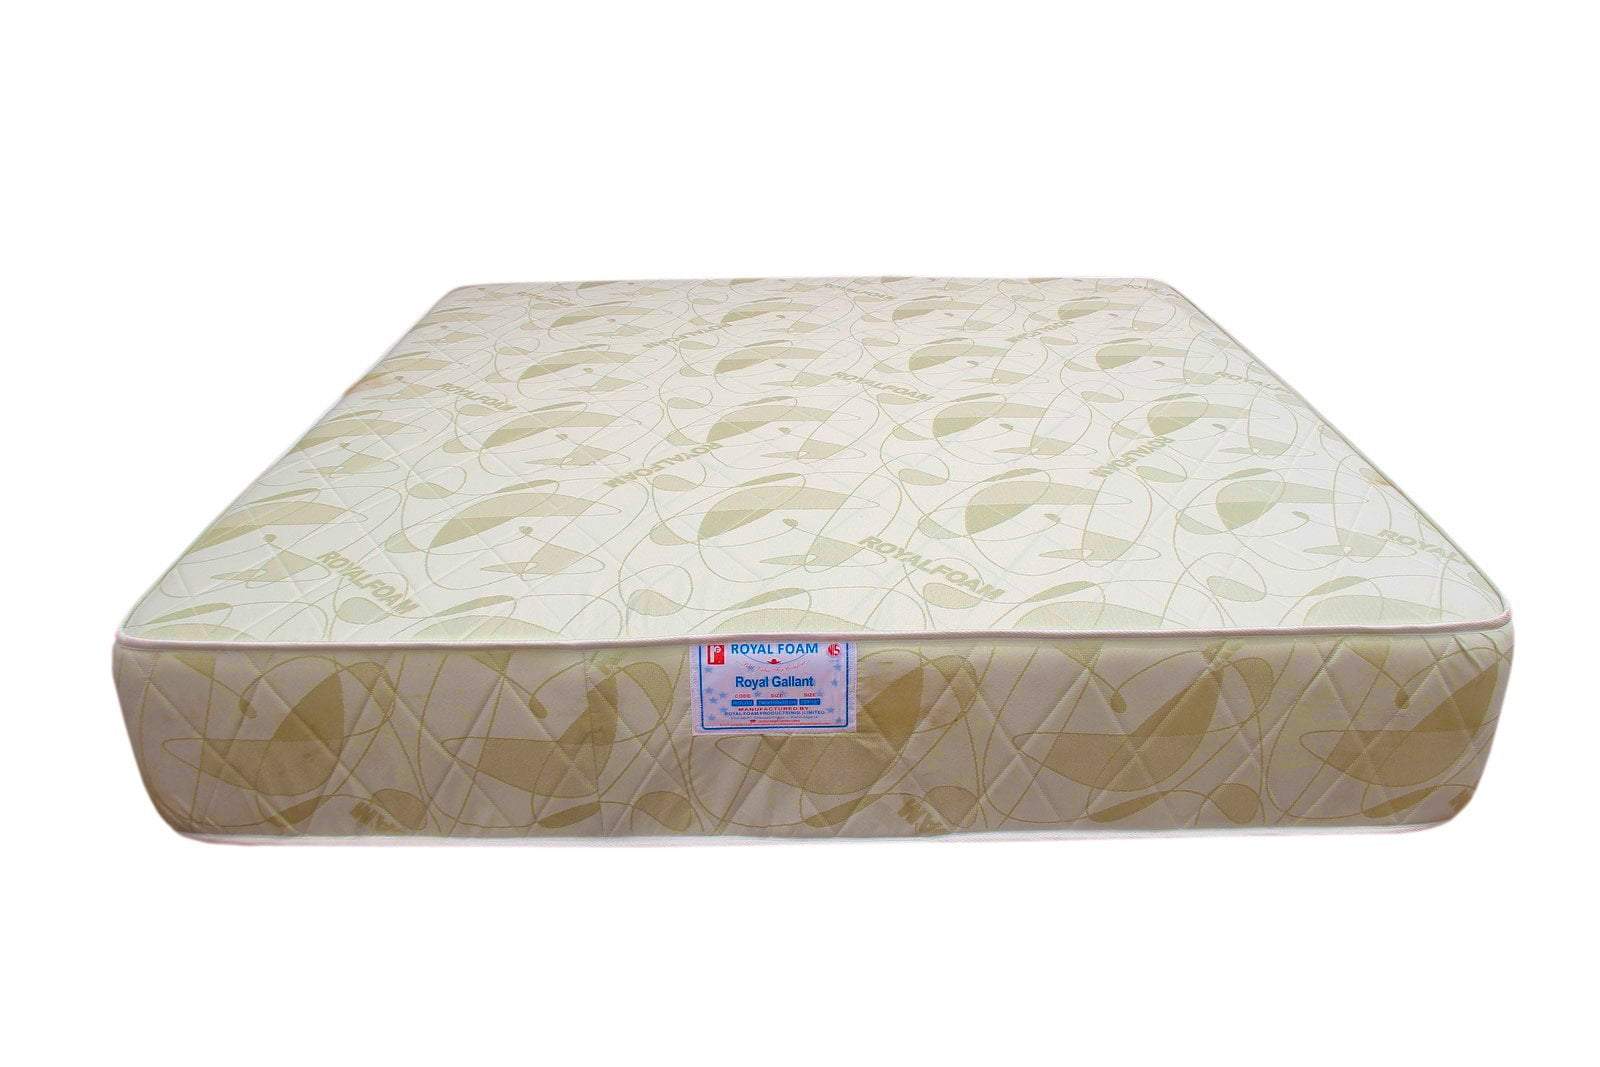 Royal Gallant Plus JACQUARD fabric-Fully Quilted Mattress 190 X 180 X 20 CM(6ft x 6ft x 8inches) 2 Adult (Queen Size)(Lagos Only)